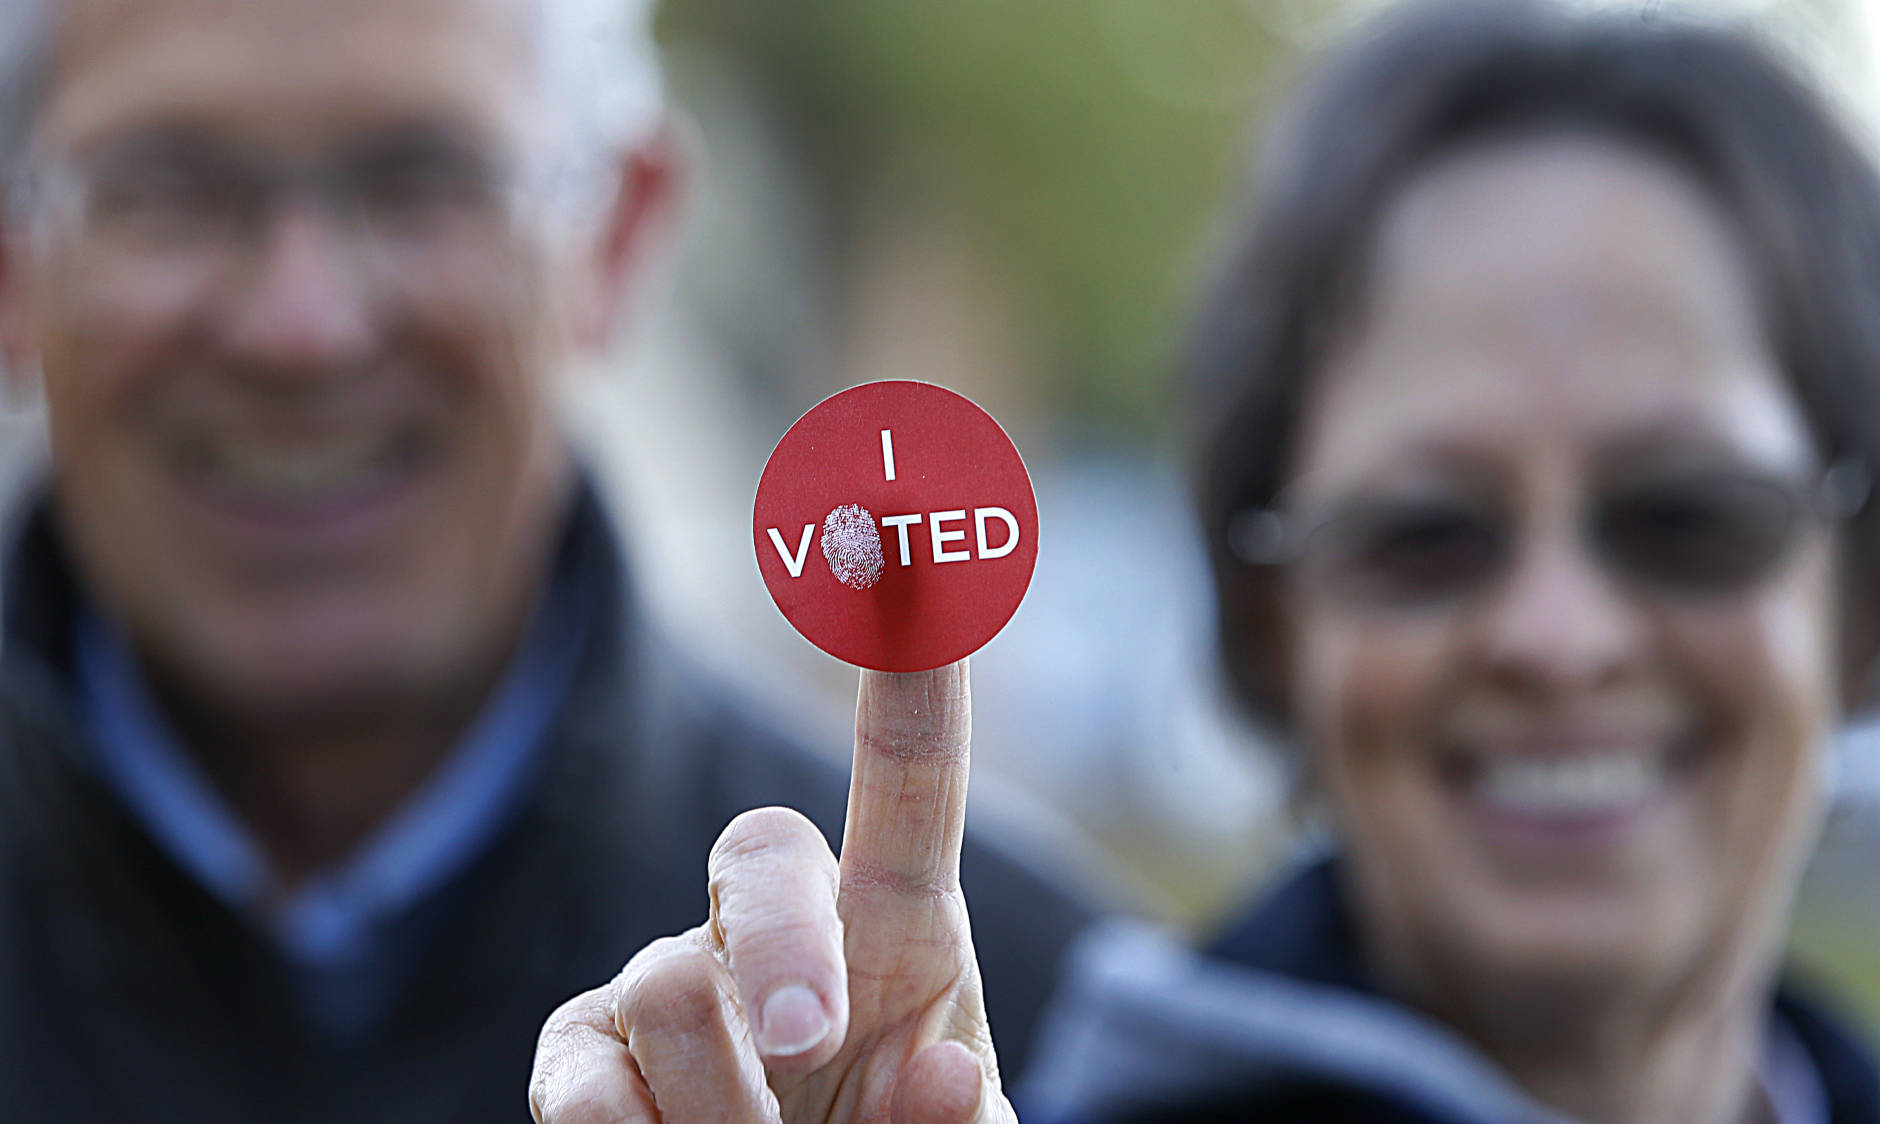 PROVO, UT - NOVEMBER 08: A couple shows off their "I Voted" sticker as they leave Wasatch Elementary school after casting their ballot in the presidential election on November 8, 2016 in Provo, Utah.   Americans across the nation make their choice for the next president of the United States today.  (Photo by George Frey/Getty Images)